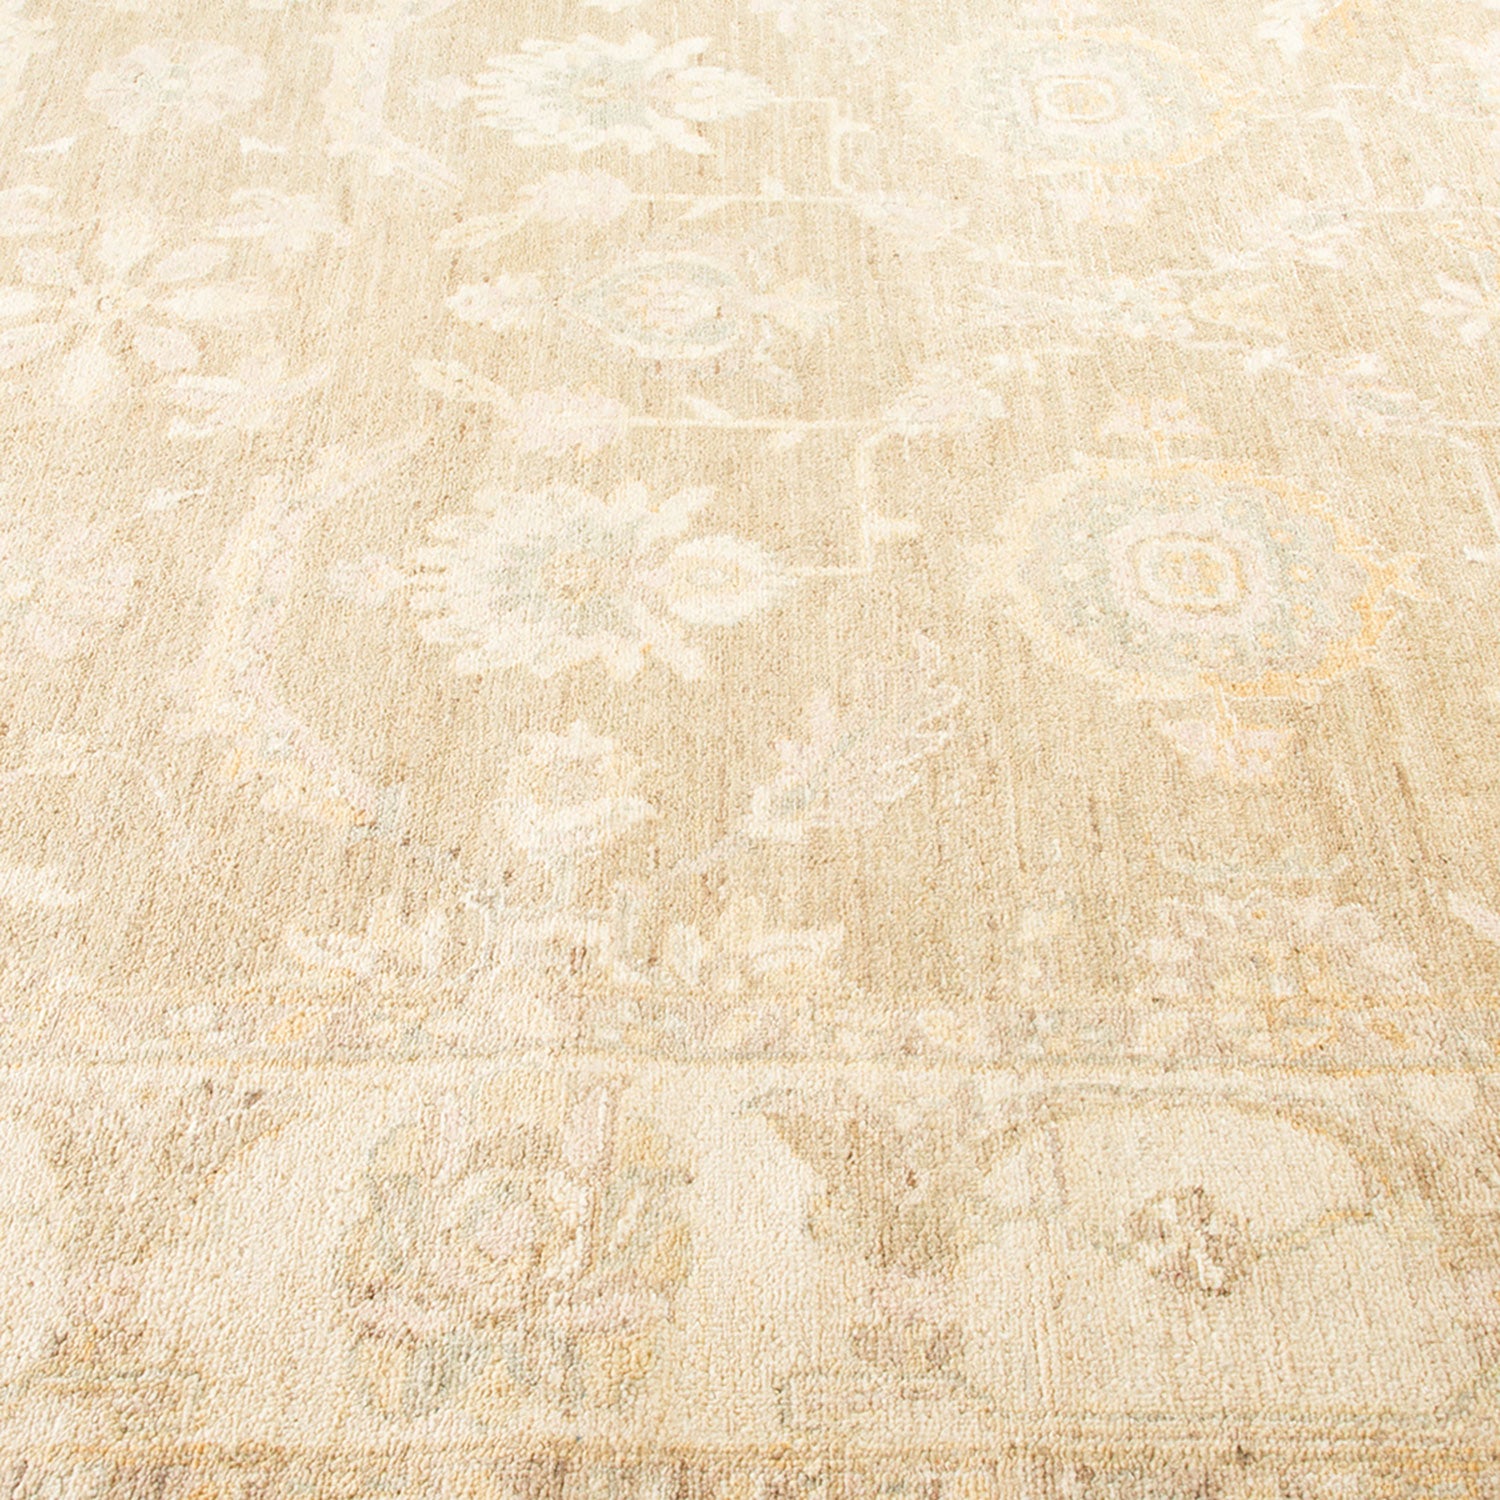 An elegant, light-colored rug with a subtle floral-geometric pattern.